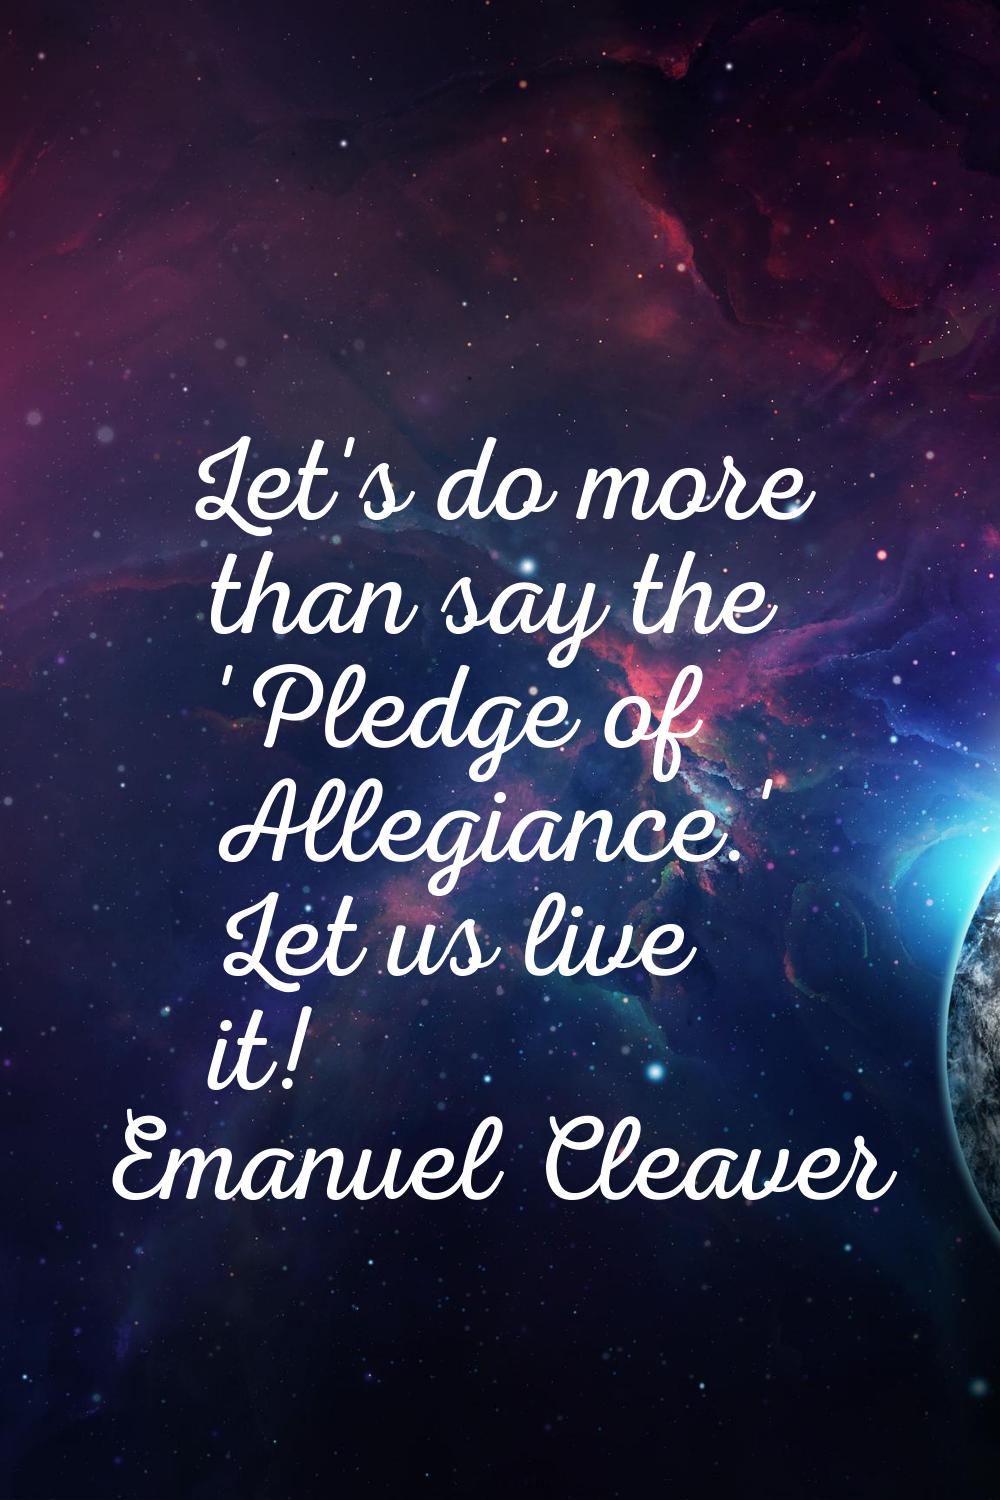 Let's do more than say the 'Pledge of Allegiance.' Let us live it!